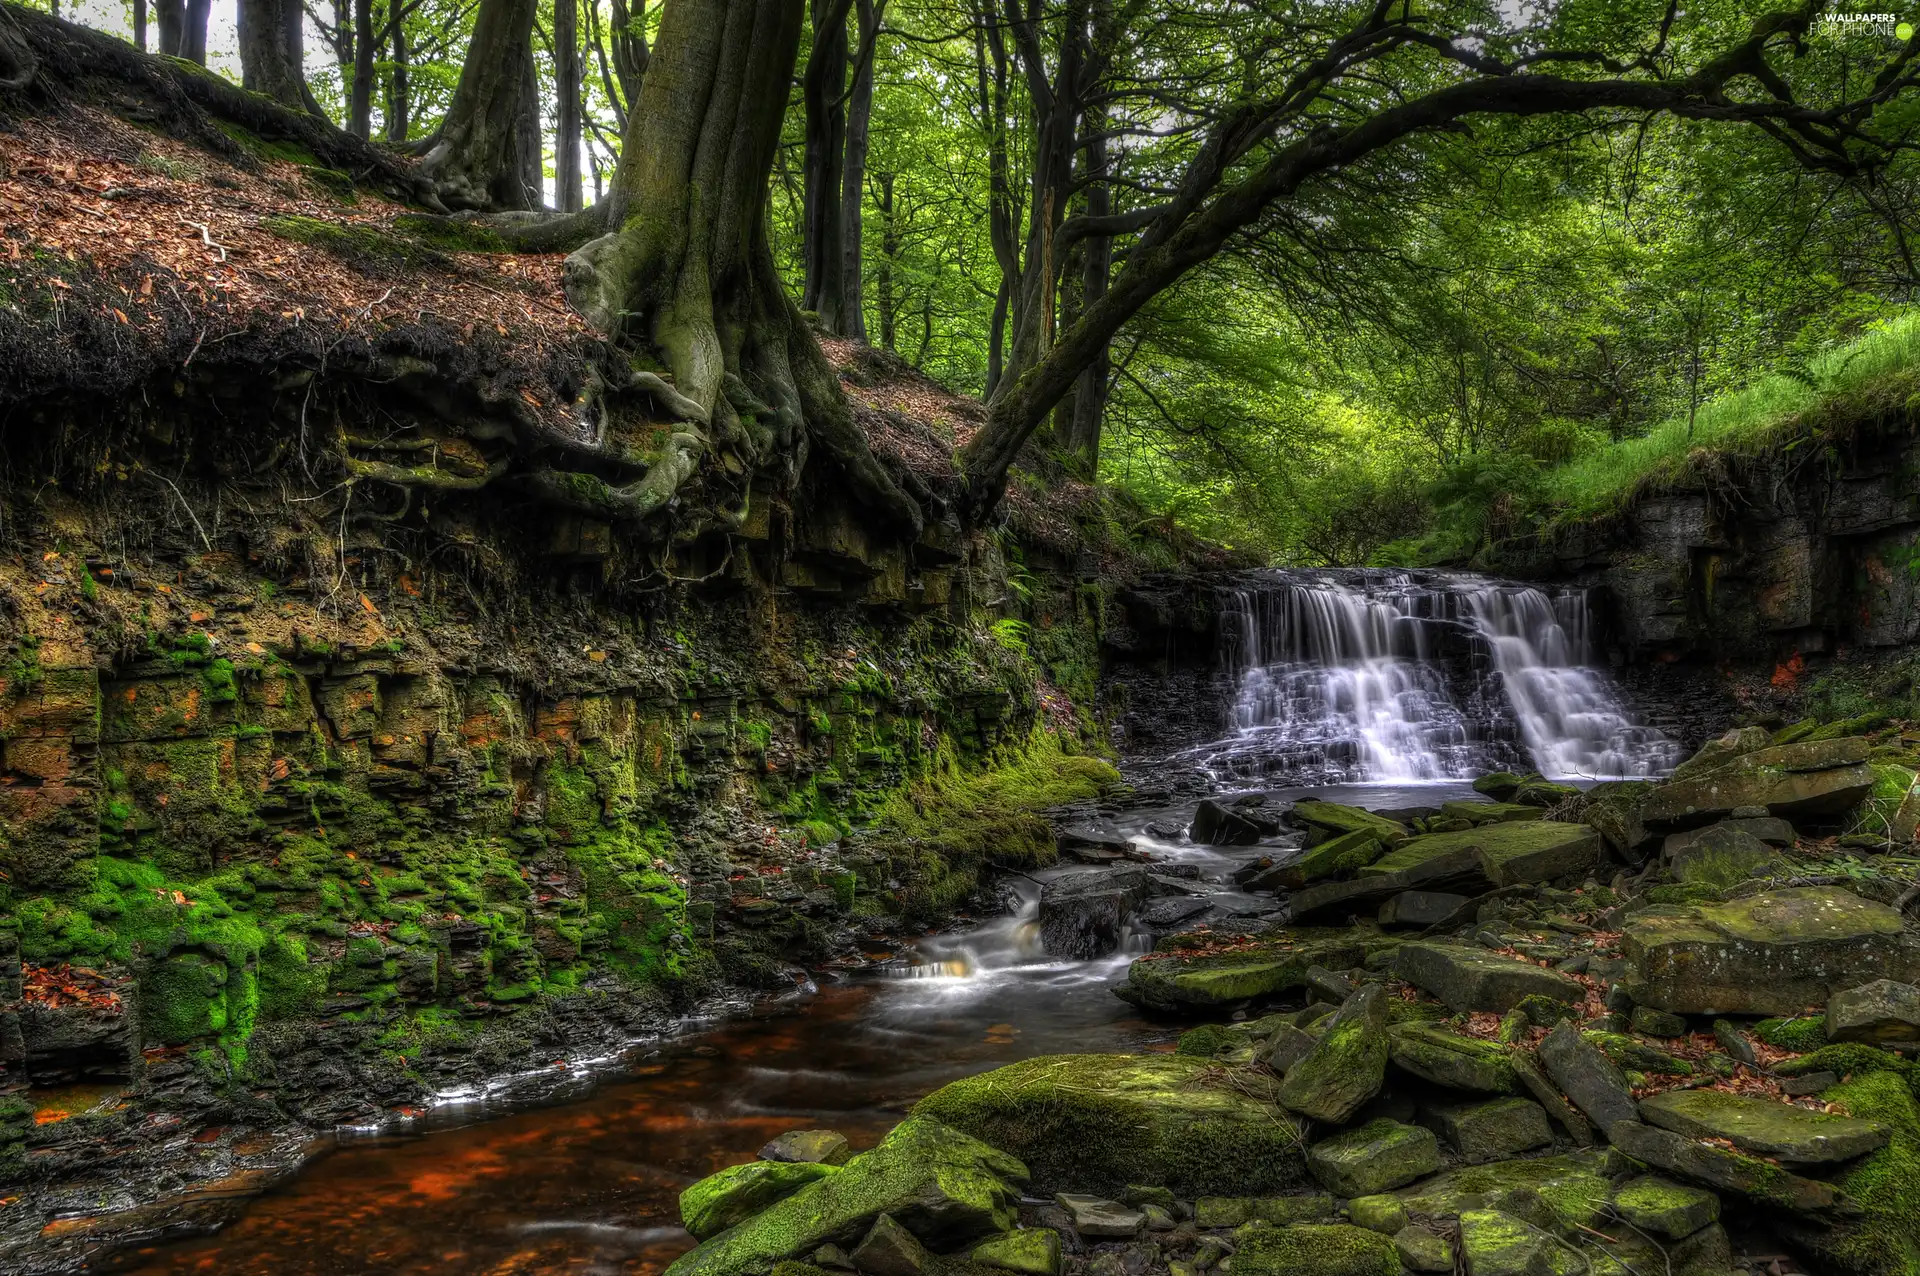 scarp, VEGETATION, mossy, waterfall, small, Stones, viewes, forest, rocks, trees, River, stream